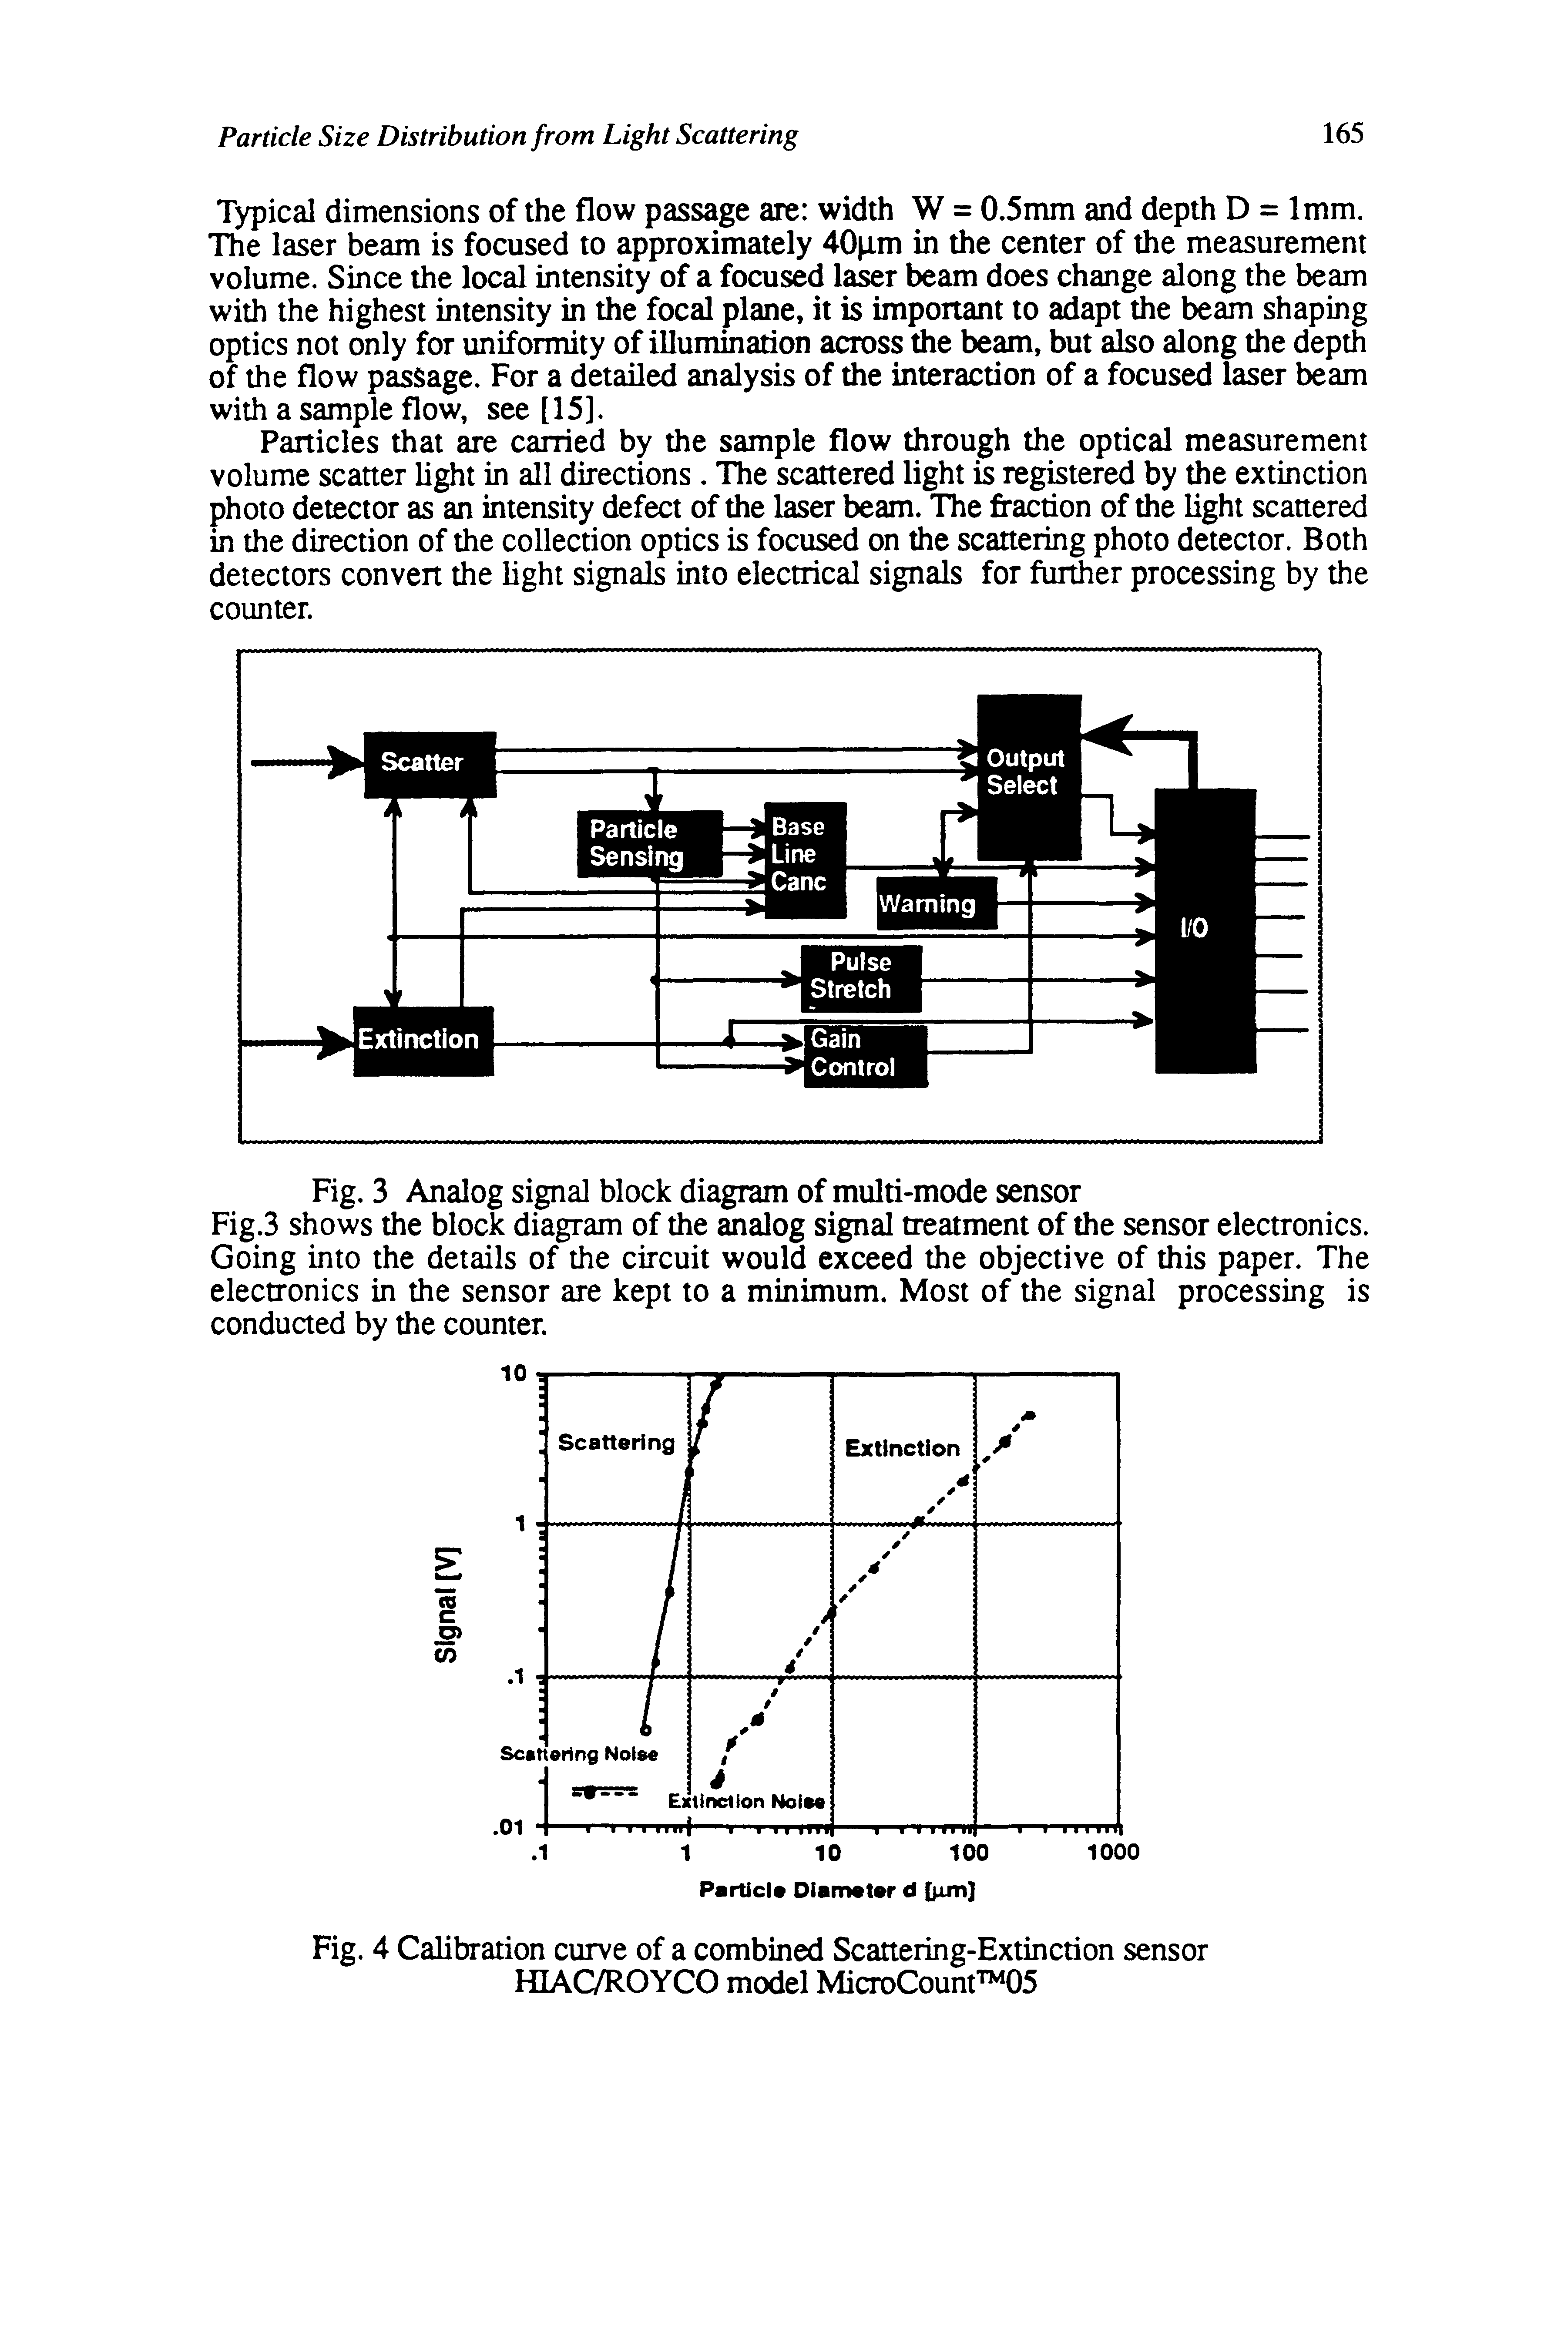 Fig. 3 Analog signal block diagram of multi-mode sensor Fig.3 shows the block diagram of the analog signal treatment of the sensor electronics. Going into the details of the circuit would exceed the objective of this paper. The electronics in the sensor are kept to a minimum. Most of the signal processing is conduaed by the counter.